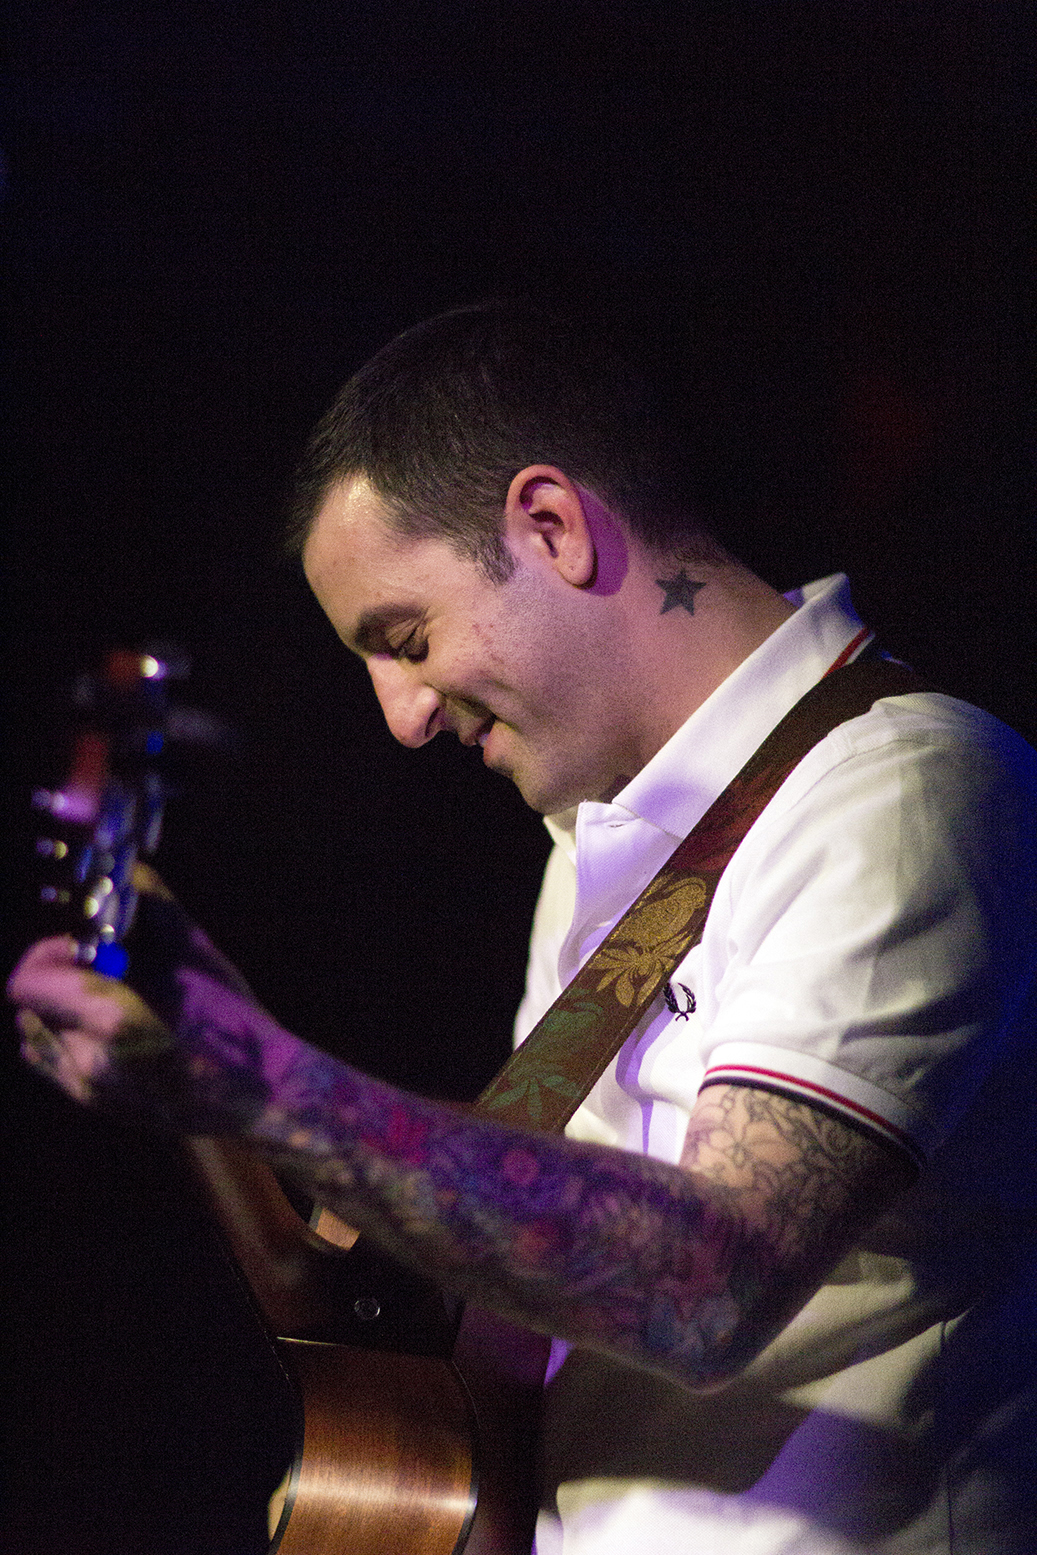 Bayside - lead singer and songwriter, Anthony Raneri playing guitar.